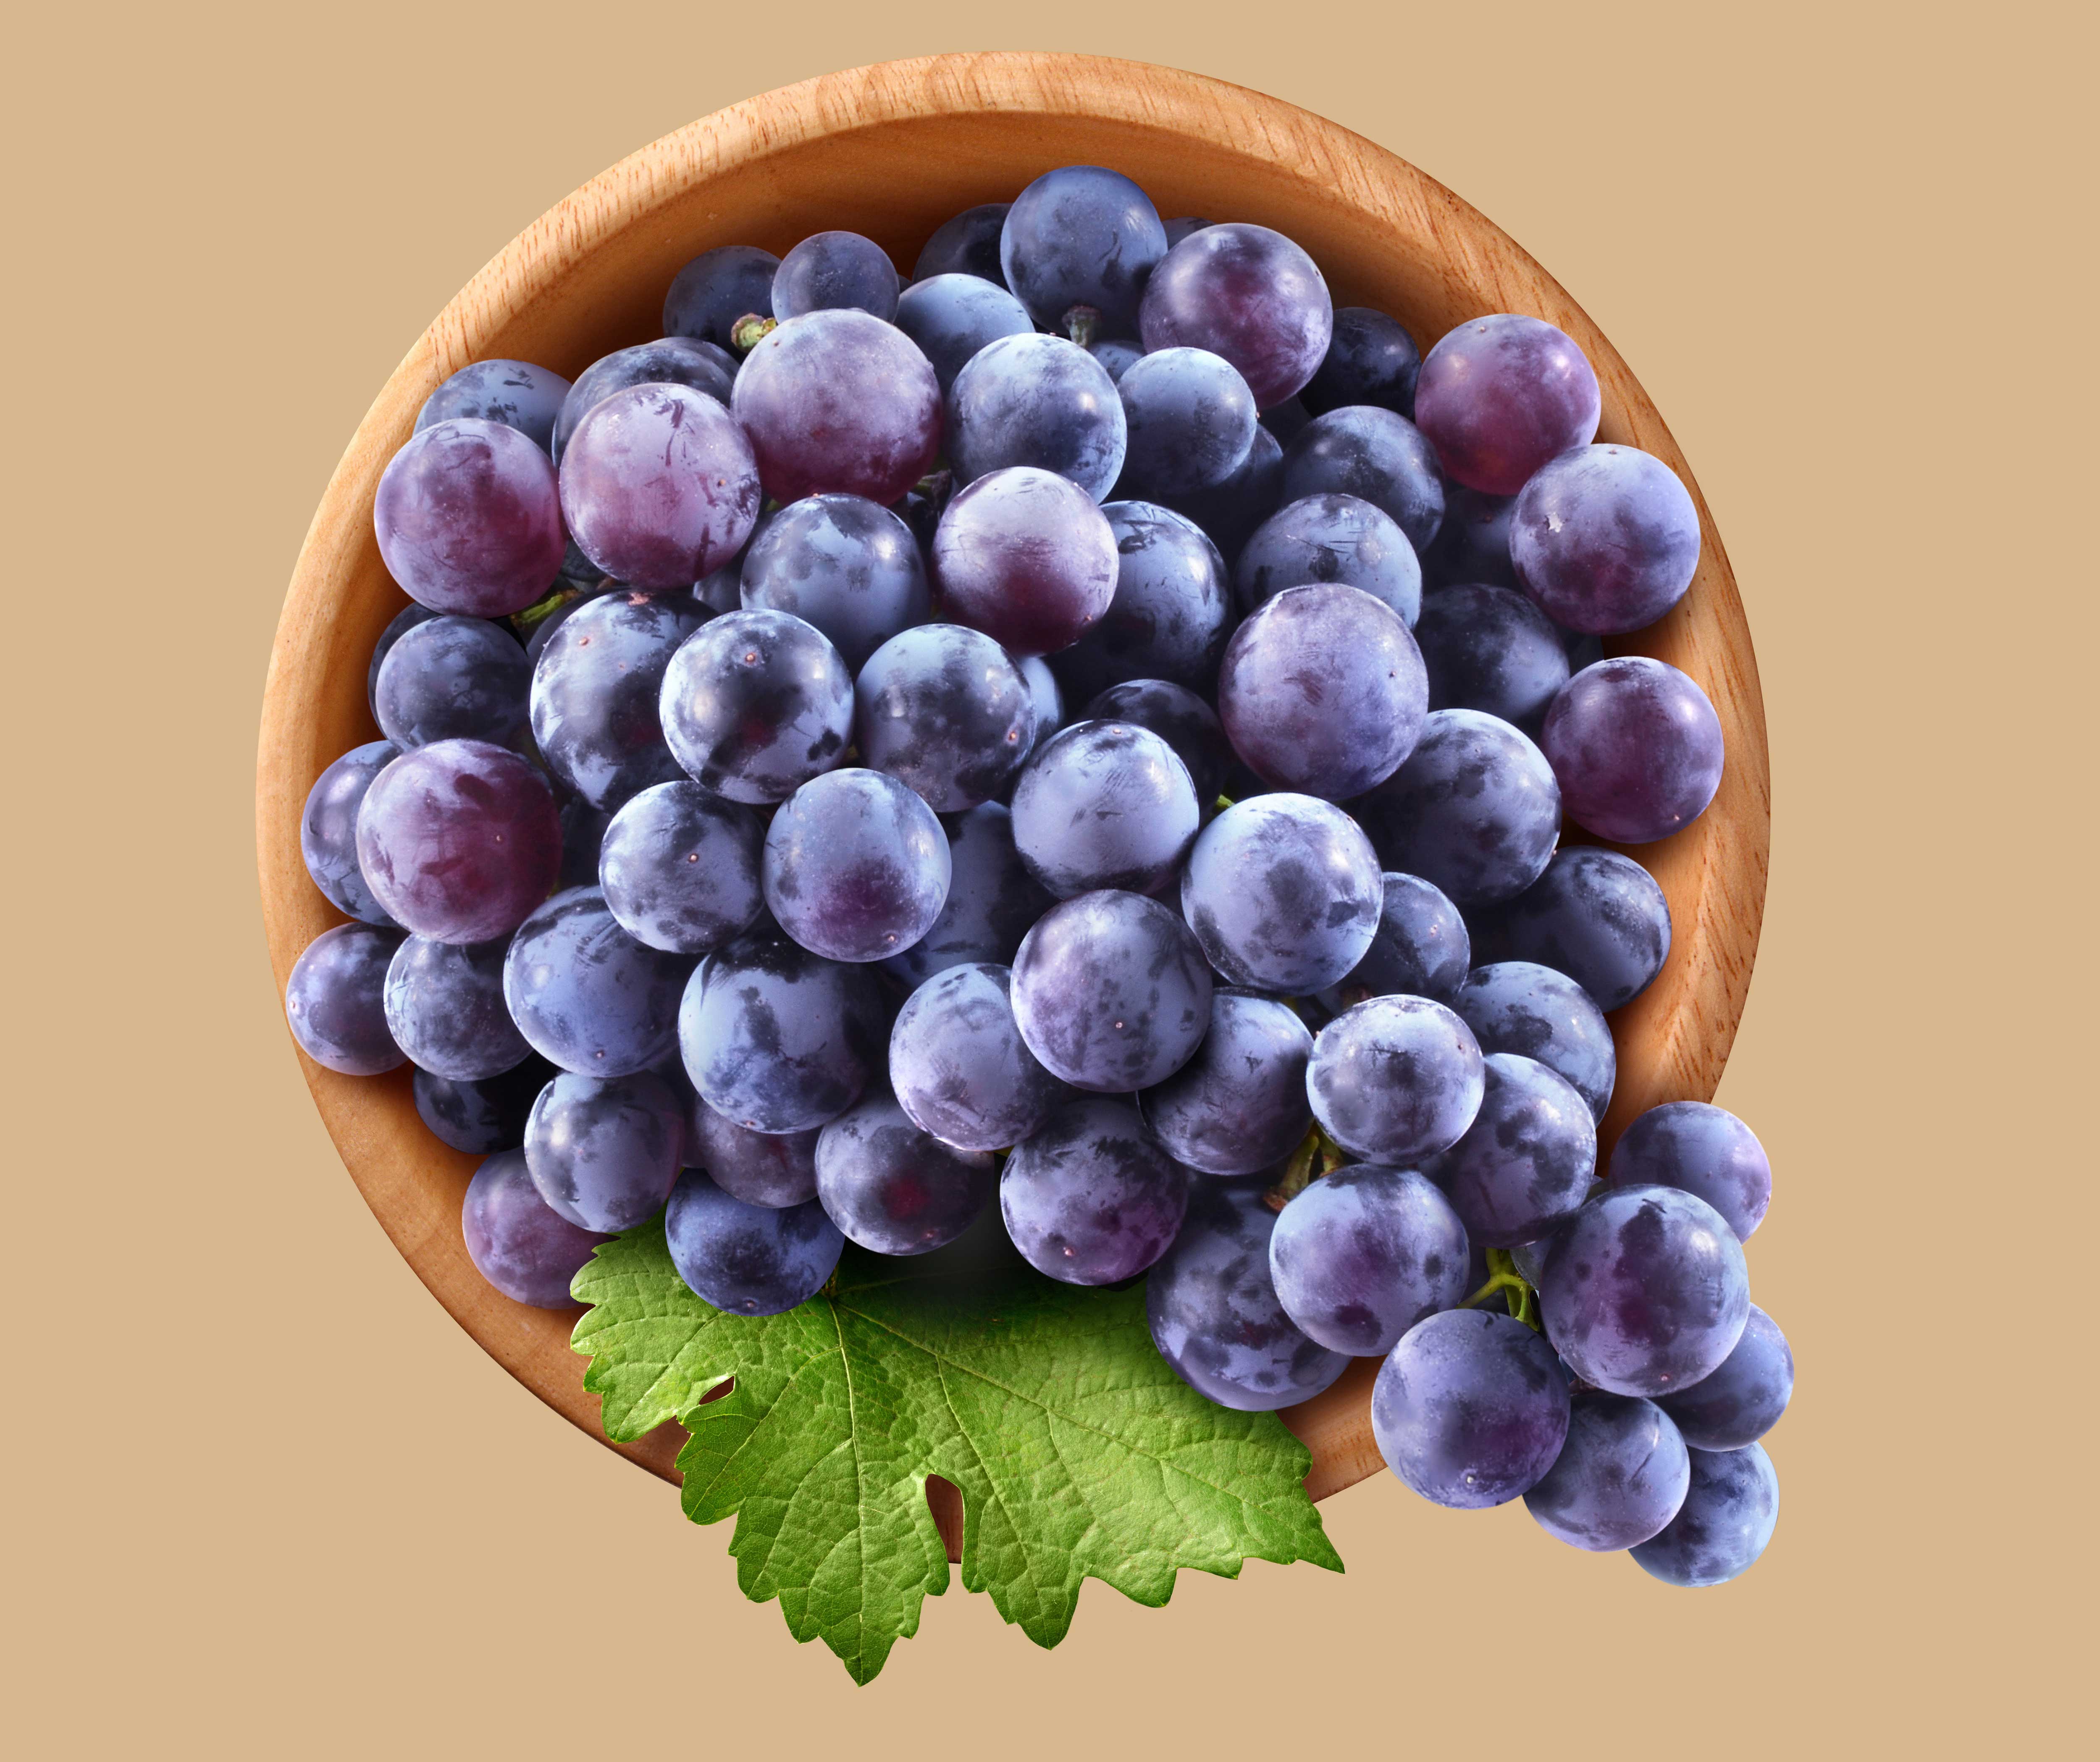 mike wepplo photoreal photography bowl of concord grapes